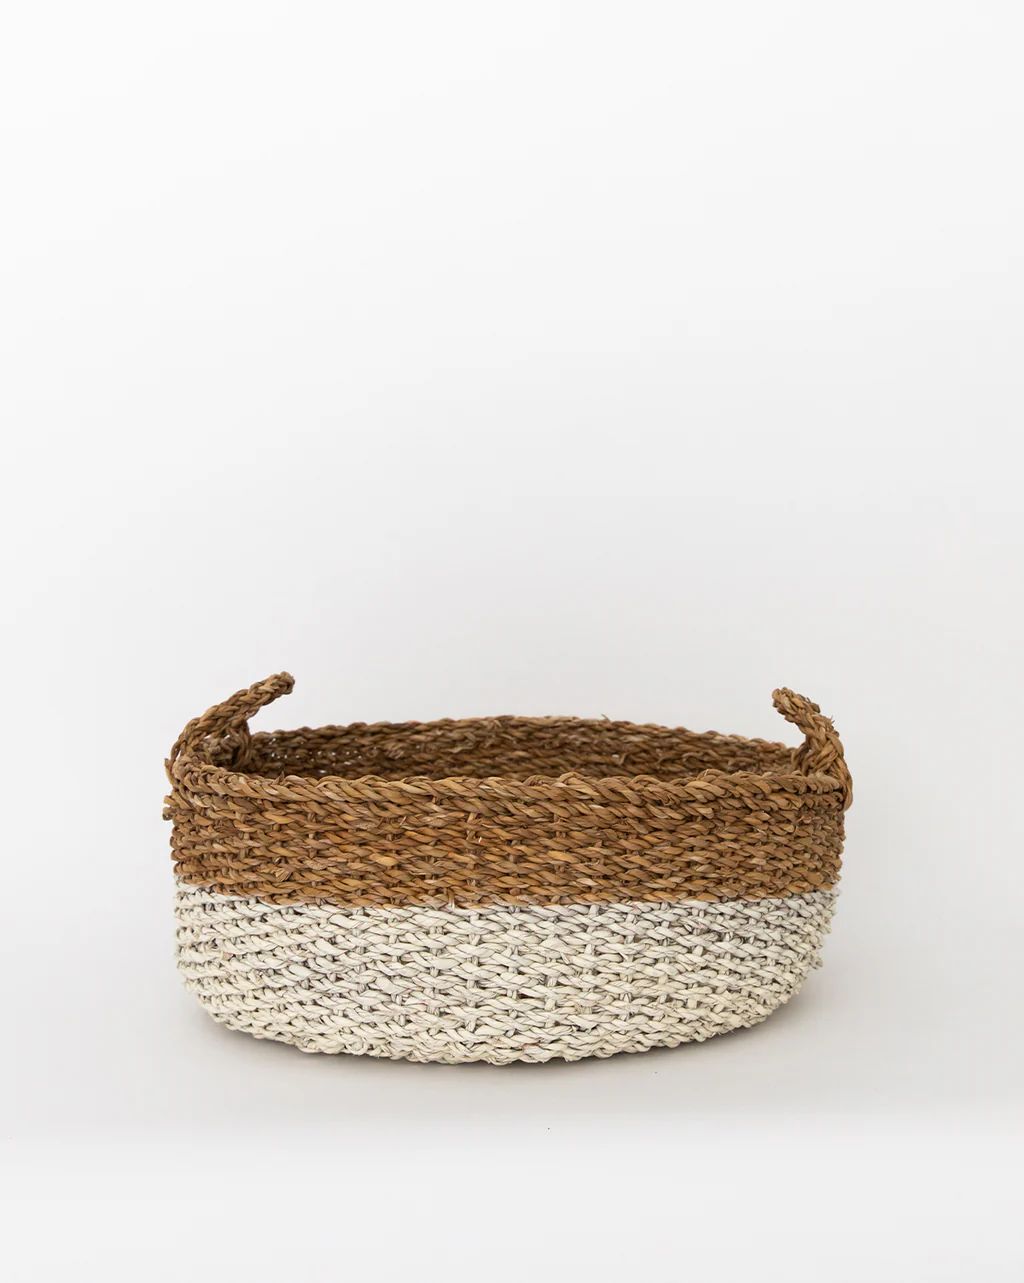 Dipped Seagrass Baskets | McGee & Co.